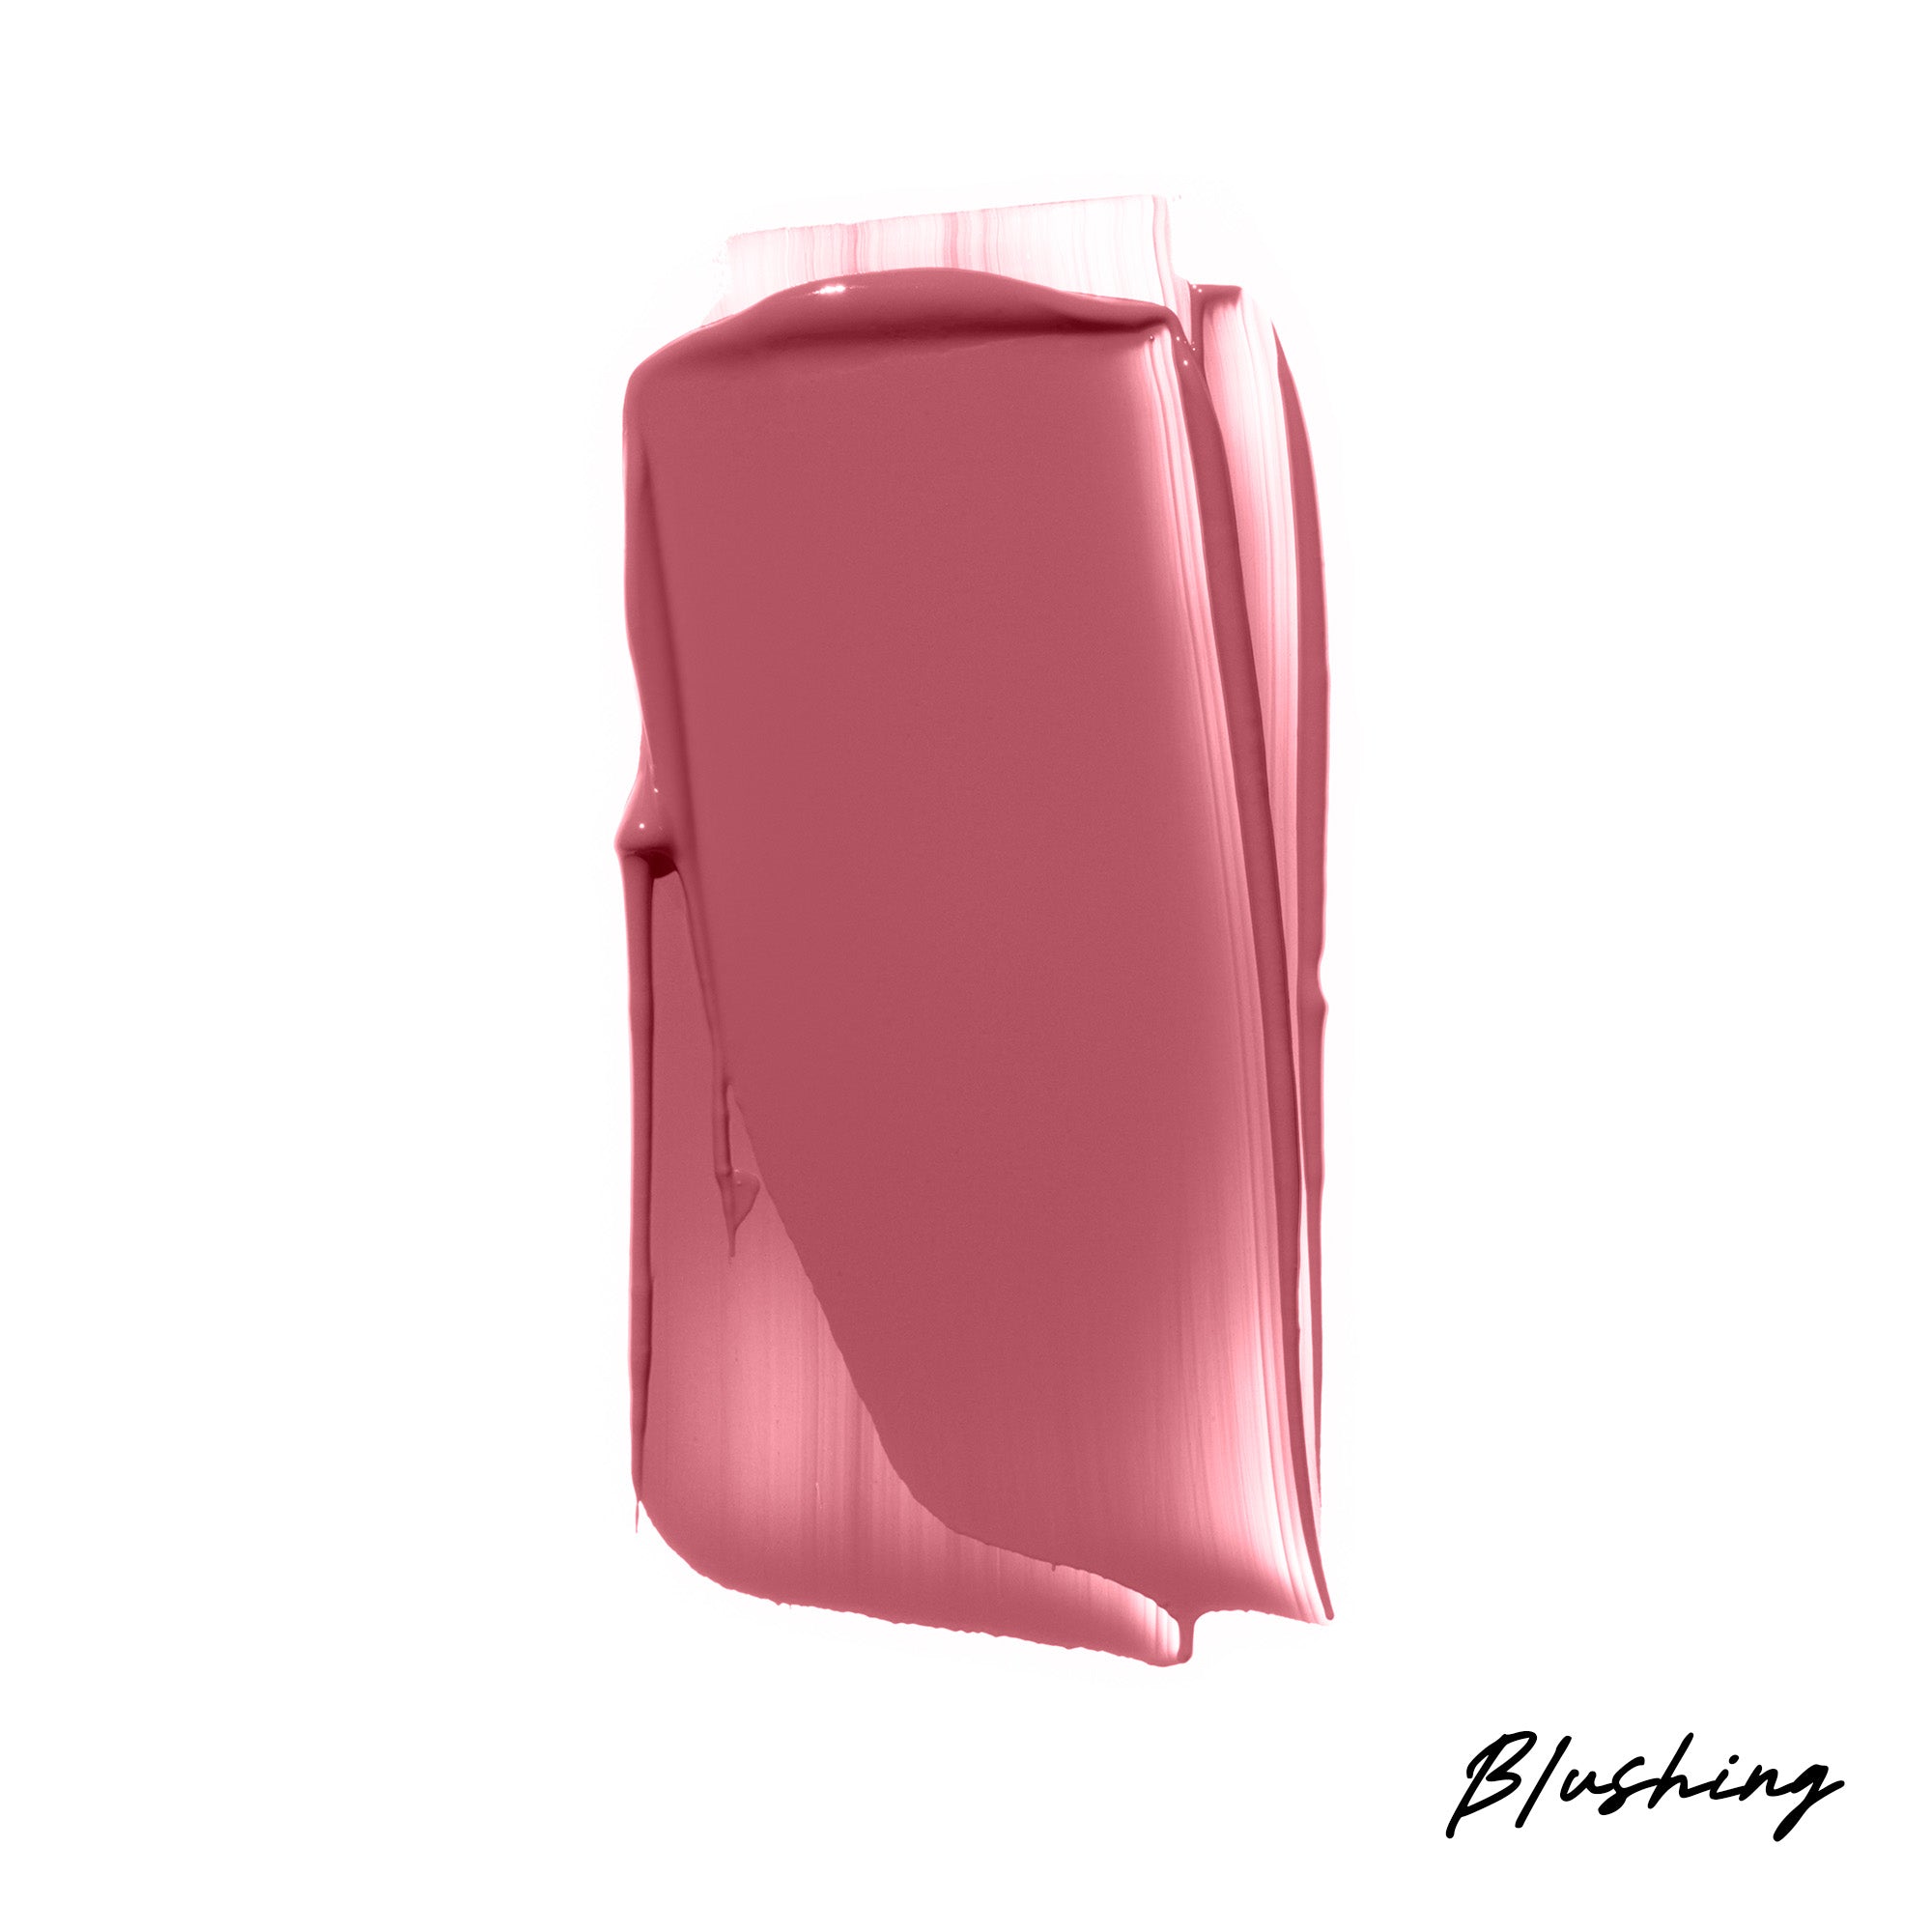 #color_blushing (neutral berry)